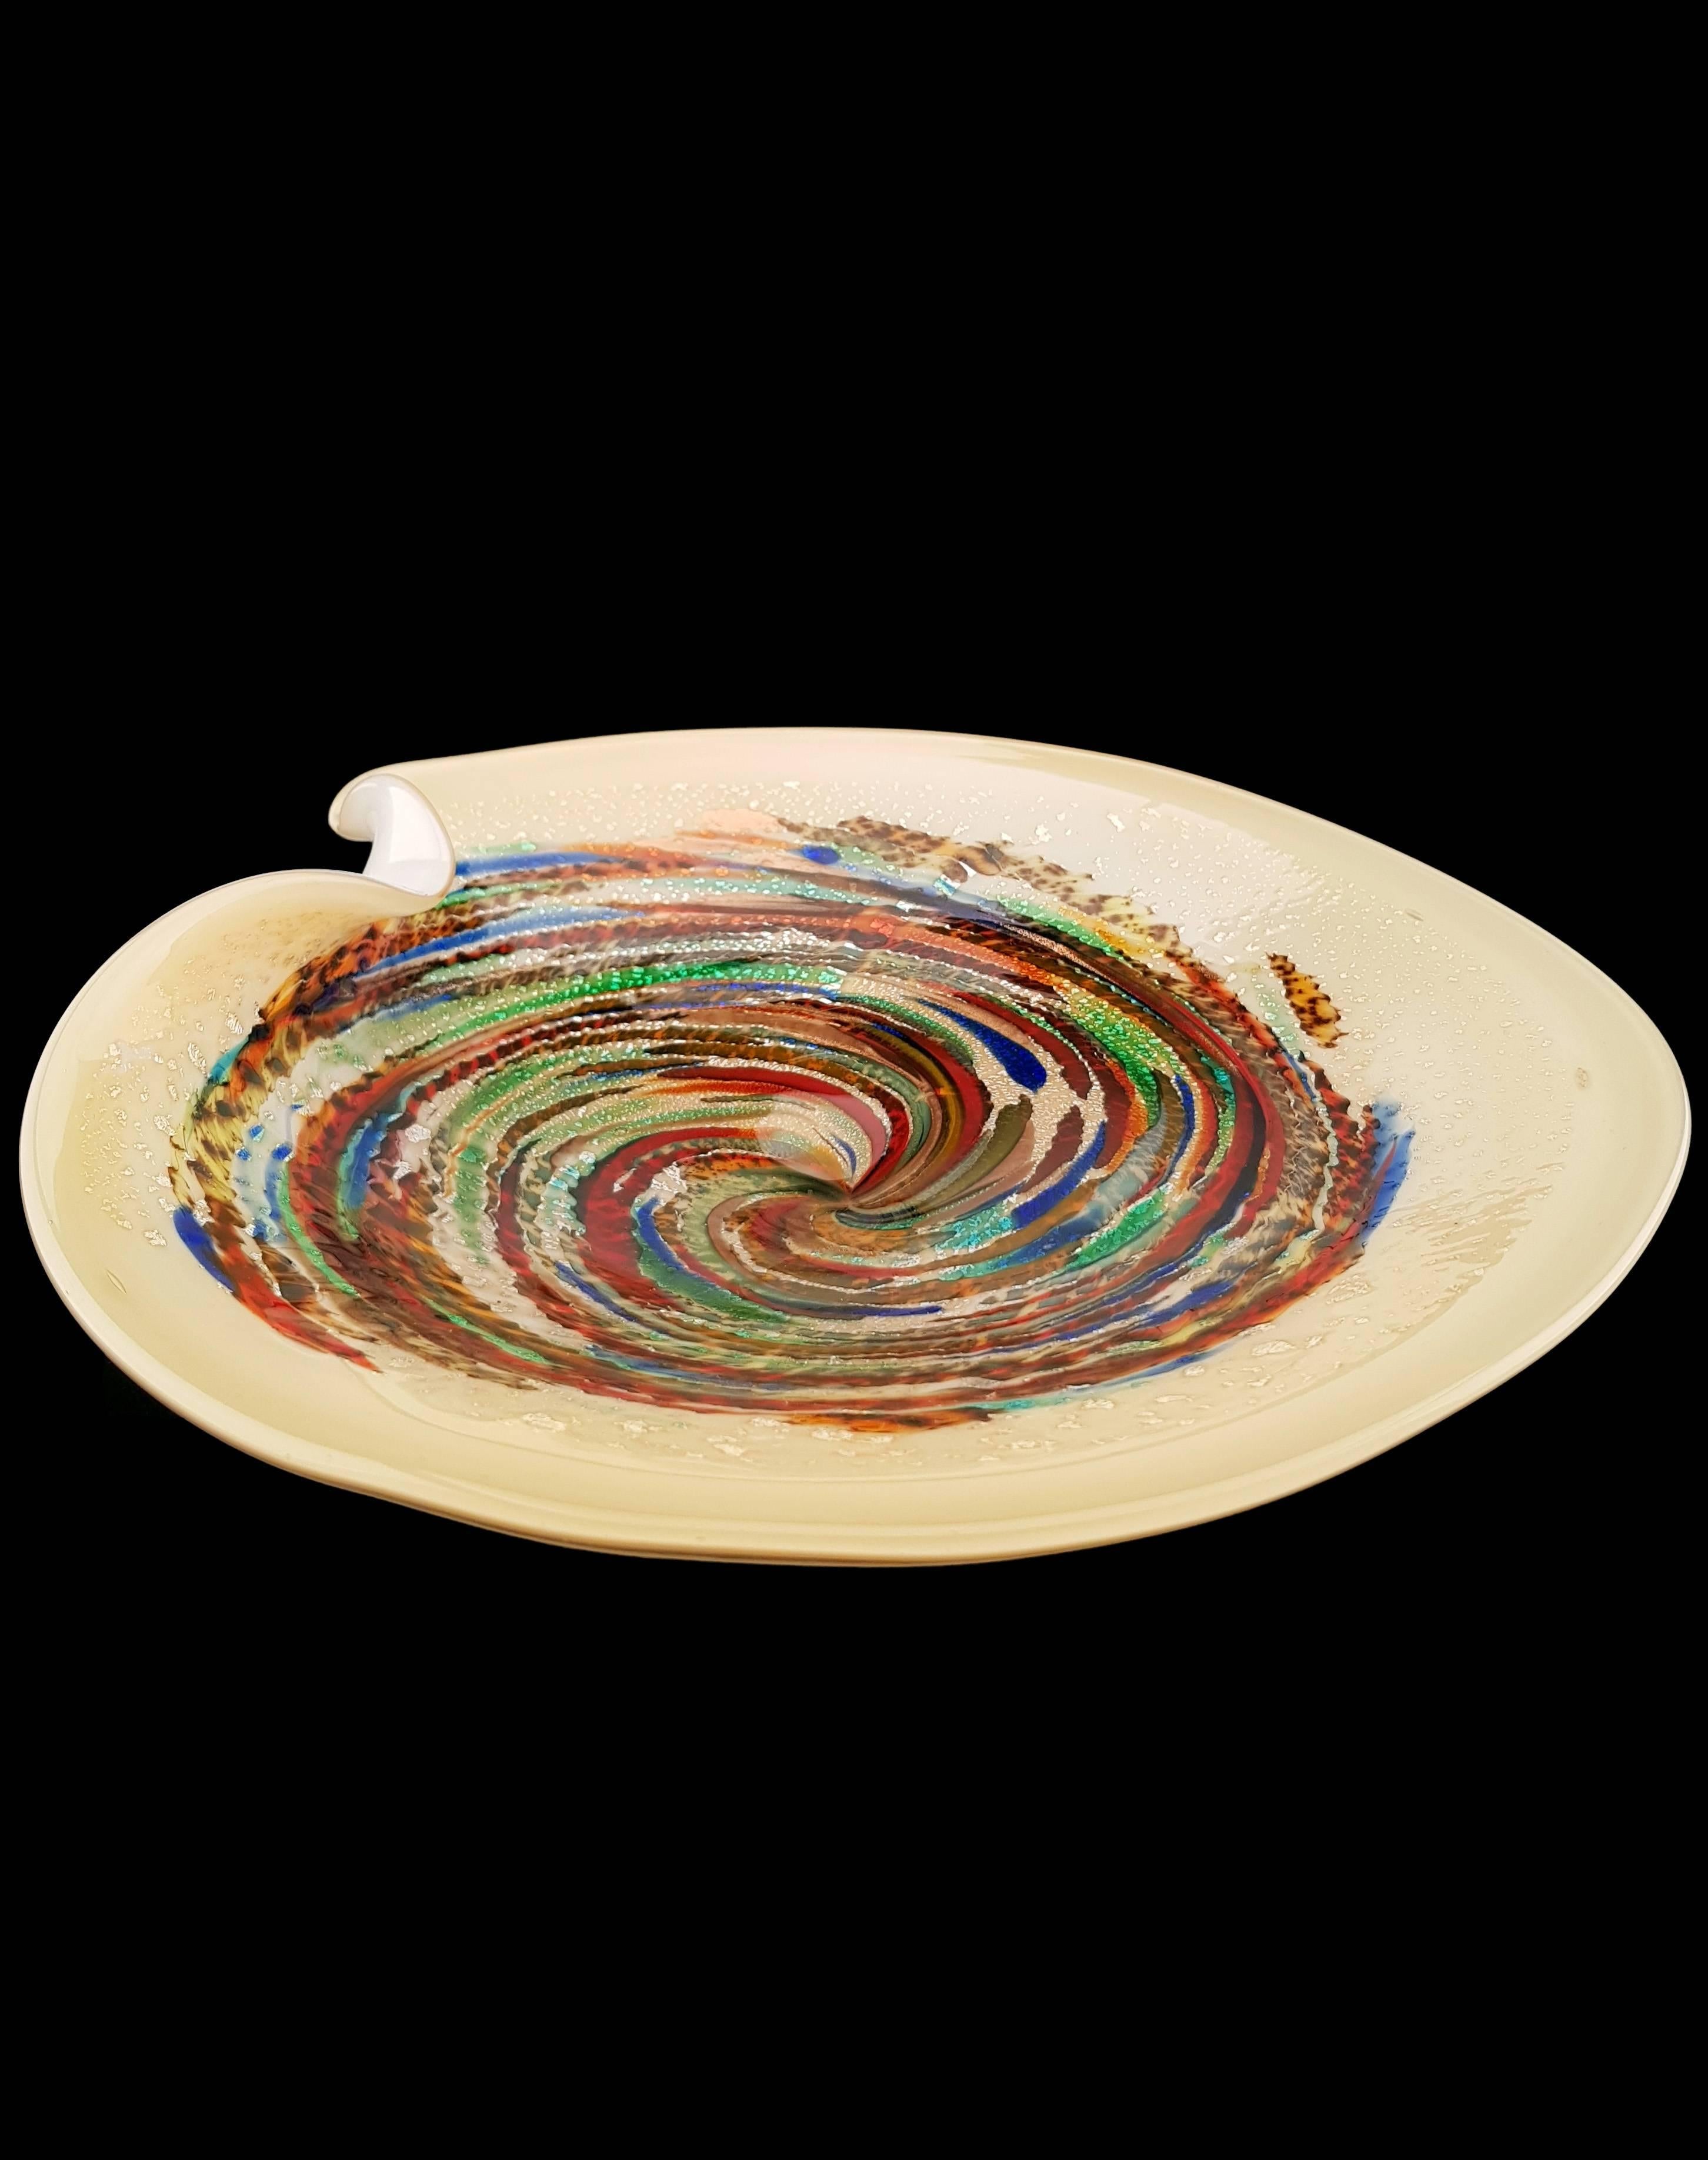 Murano Italy Avem Tutti Fruti Zanfirico Latticino large art glass bowl design Dino Martens..

Measures: Height 7 cm / 2.8 inch, 
Diameter 29.5 cm / 11.6 inch.

It is in an very good condition. (Please do not hesitate to request additional